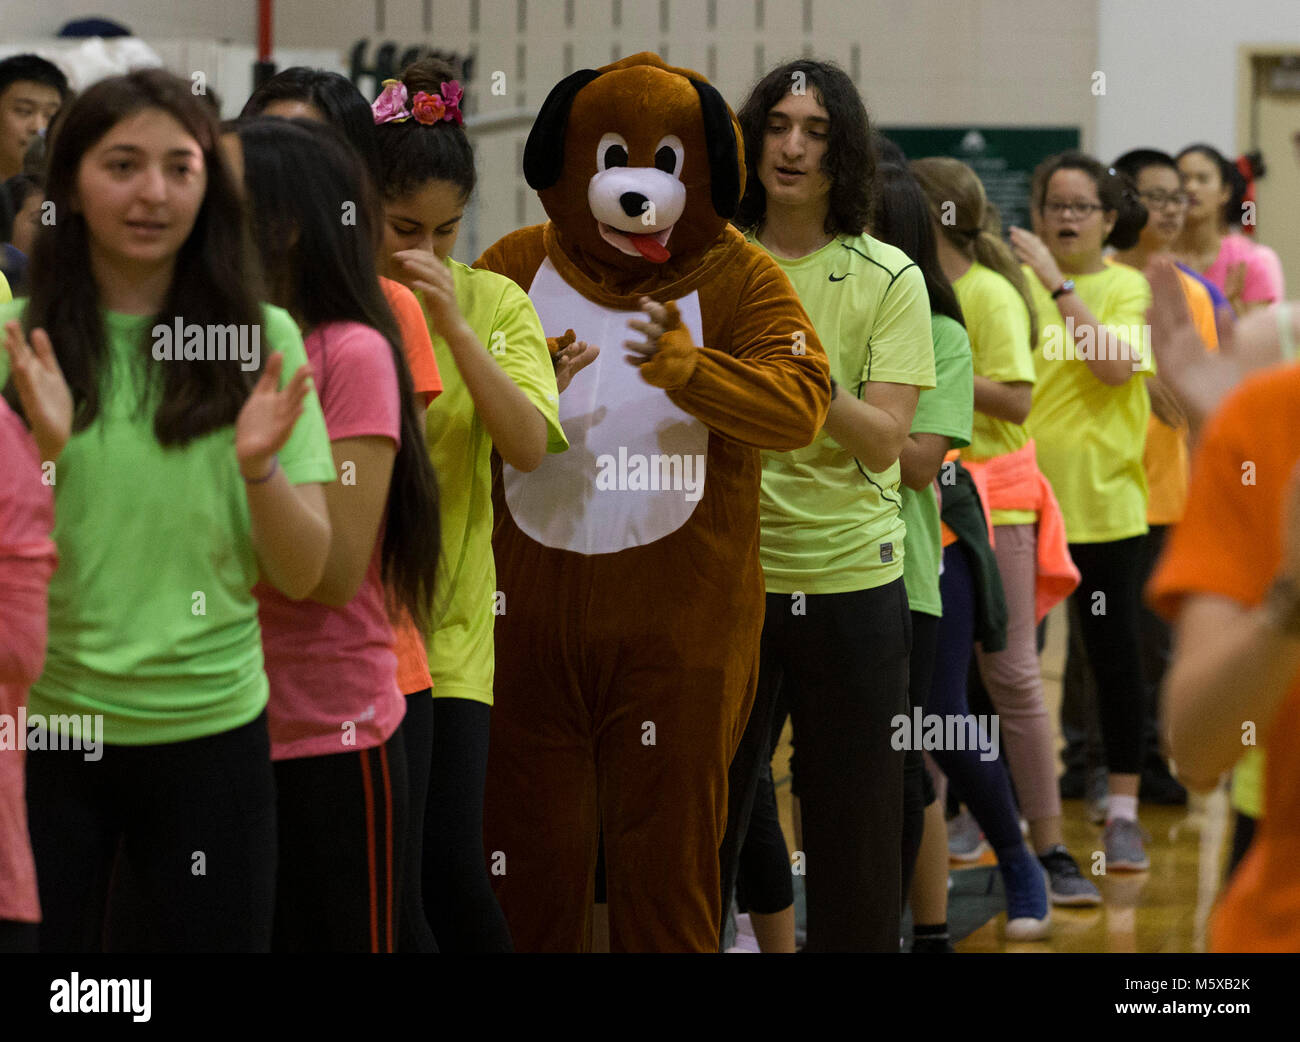 Houston, Texas, USA. 26th Feb, 2018. The principal of Awty International School Tom Beuscher dressed in a dog costume dances during the Year of the Dog performance in Houston, Texas, the United States on Feb. 26, 2018. The Awty International School in Houston, Texas Monday presented the Year of the Dog performance to observe the Chinese Lunar New Year to a crowd of 2,000. Credit: Yi-Chin Lee/Xinhua/Alamy Live News Stock Photo